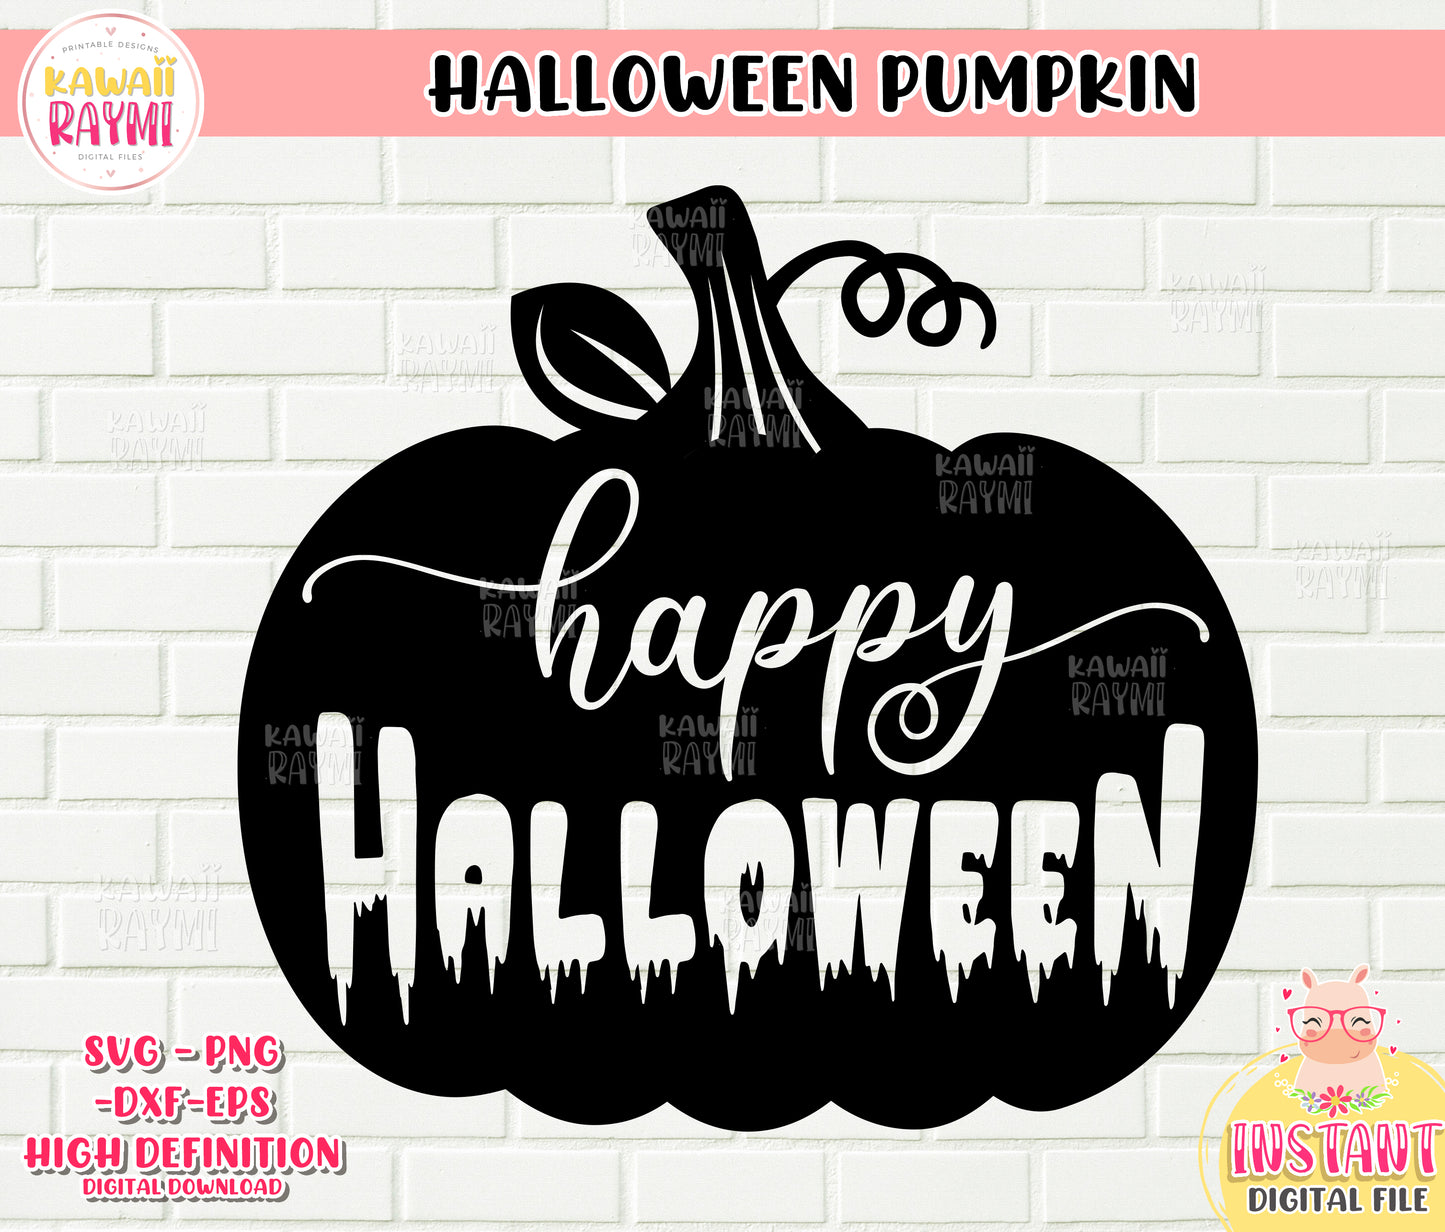 Halloween SVG Big bundle, cut files halloween, ghost, witch, zombies, svg, png, dxf, cricut, halloween day svg